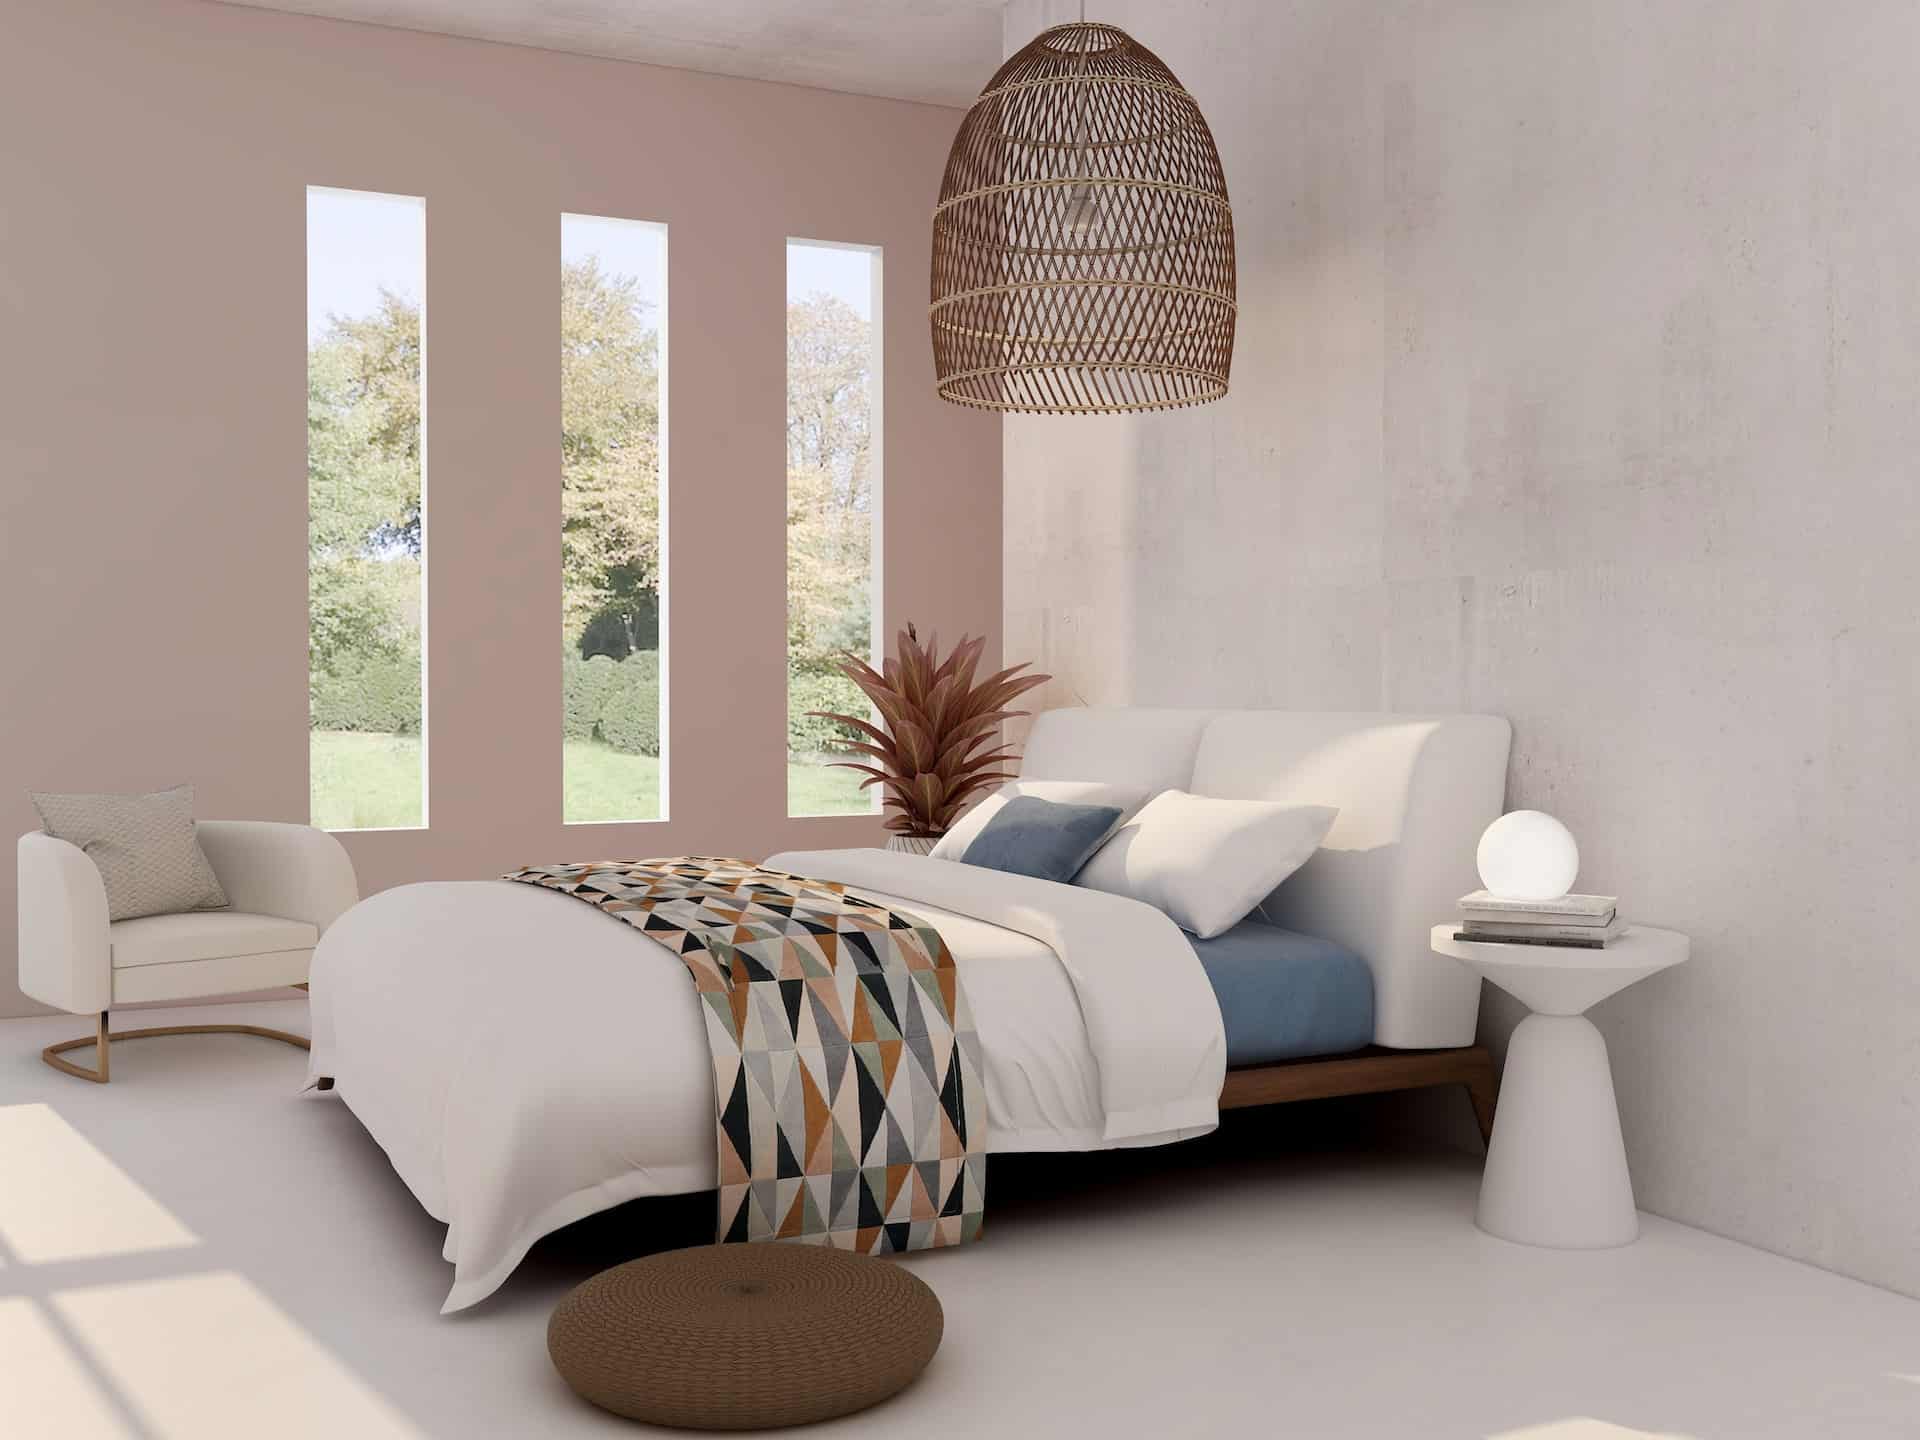 Smart lighting in the bedroom – what solutions are worth using?